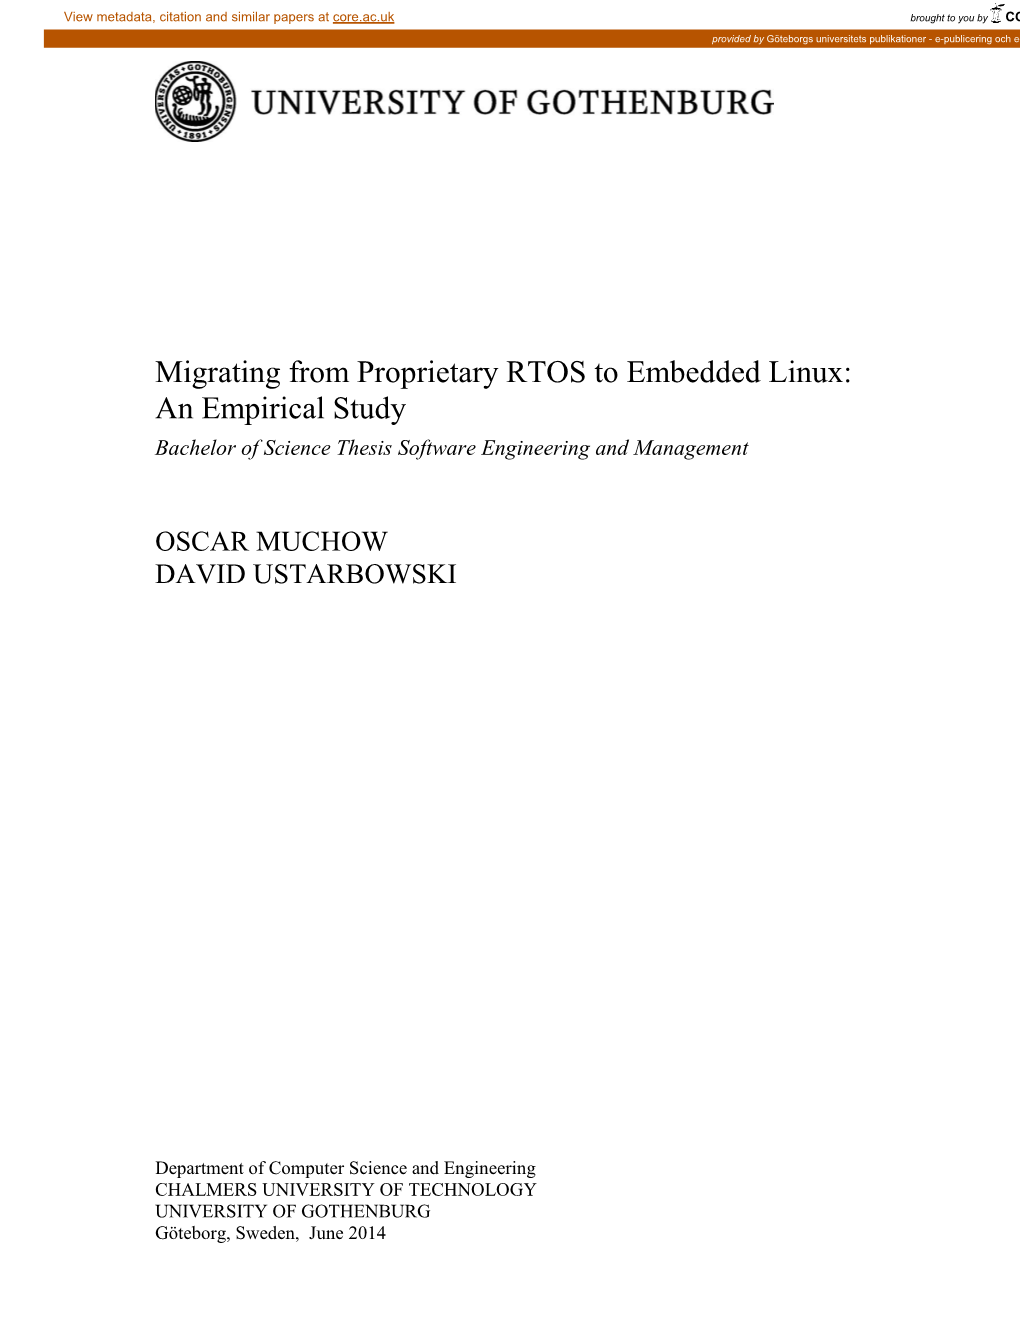 Migrating from Proprietary RTOS to Embedded Linux: an Empirical Study Bachelor of Science Thesis Software Engineering and Management